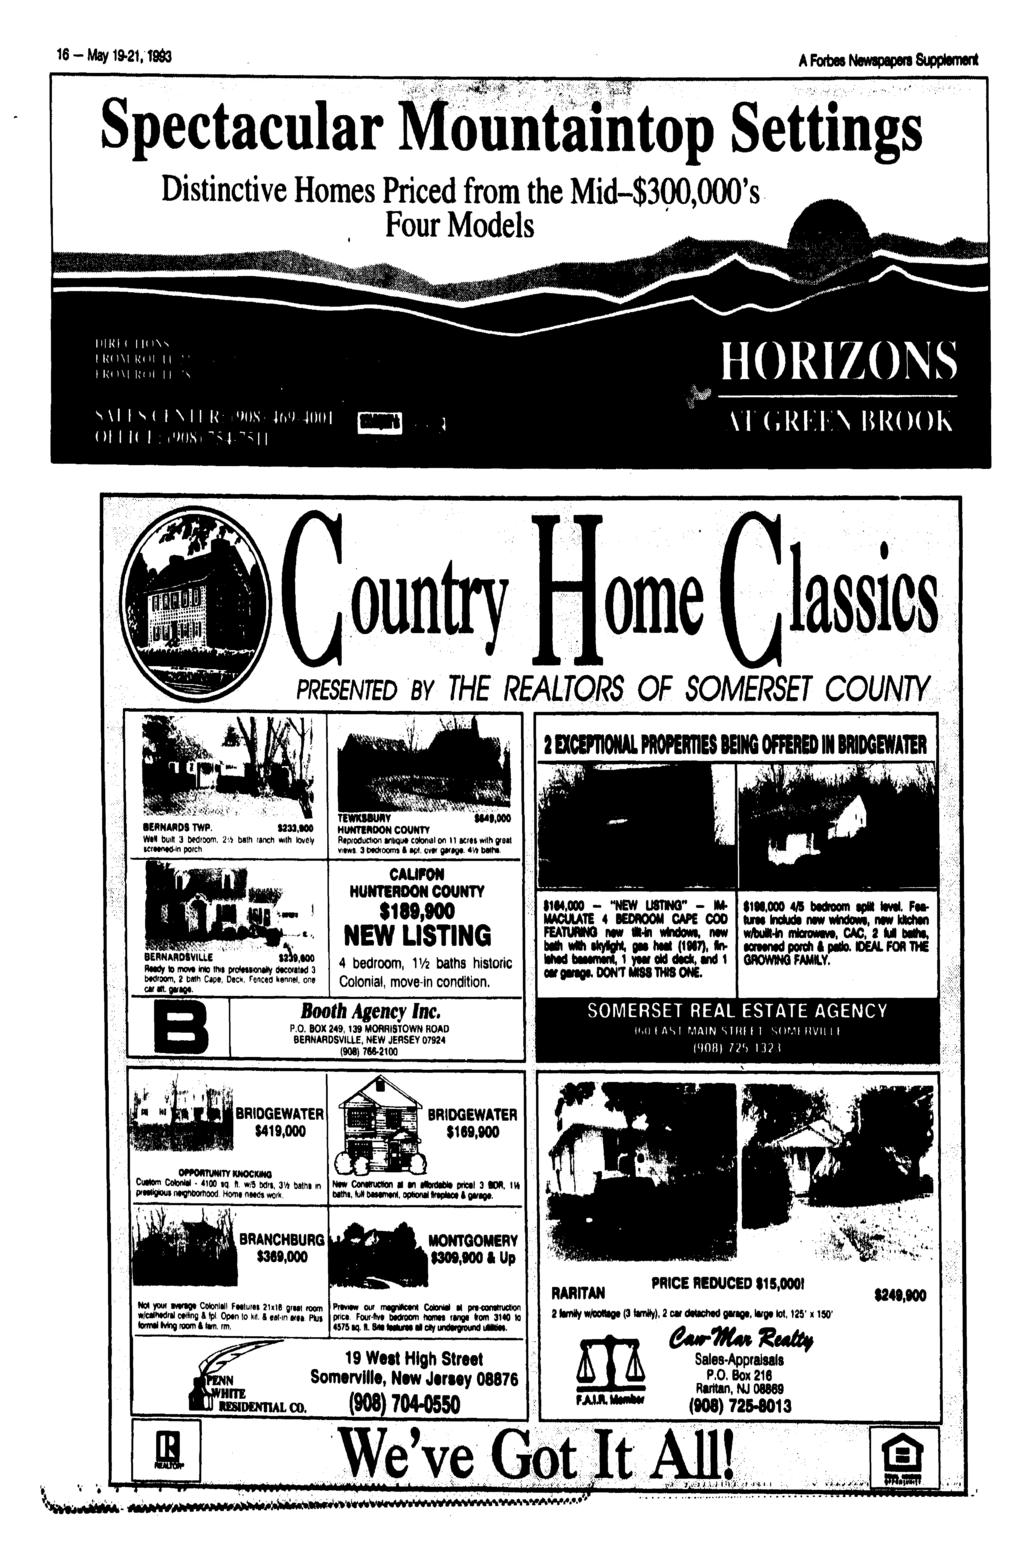 16 - May 19-21, T9& A Forbes Newspapers Supplement Spectacular Mountaintop Settings Distinctive Homes Priced from the Mid-$300,000's Four Models HORIZONS Ol I M ( f \ 11 U : I'XISI "\4 4f> t MIMU